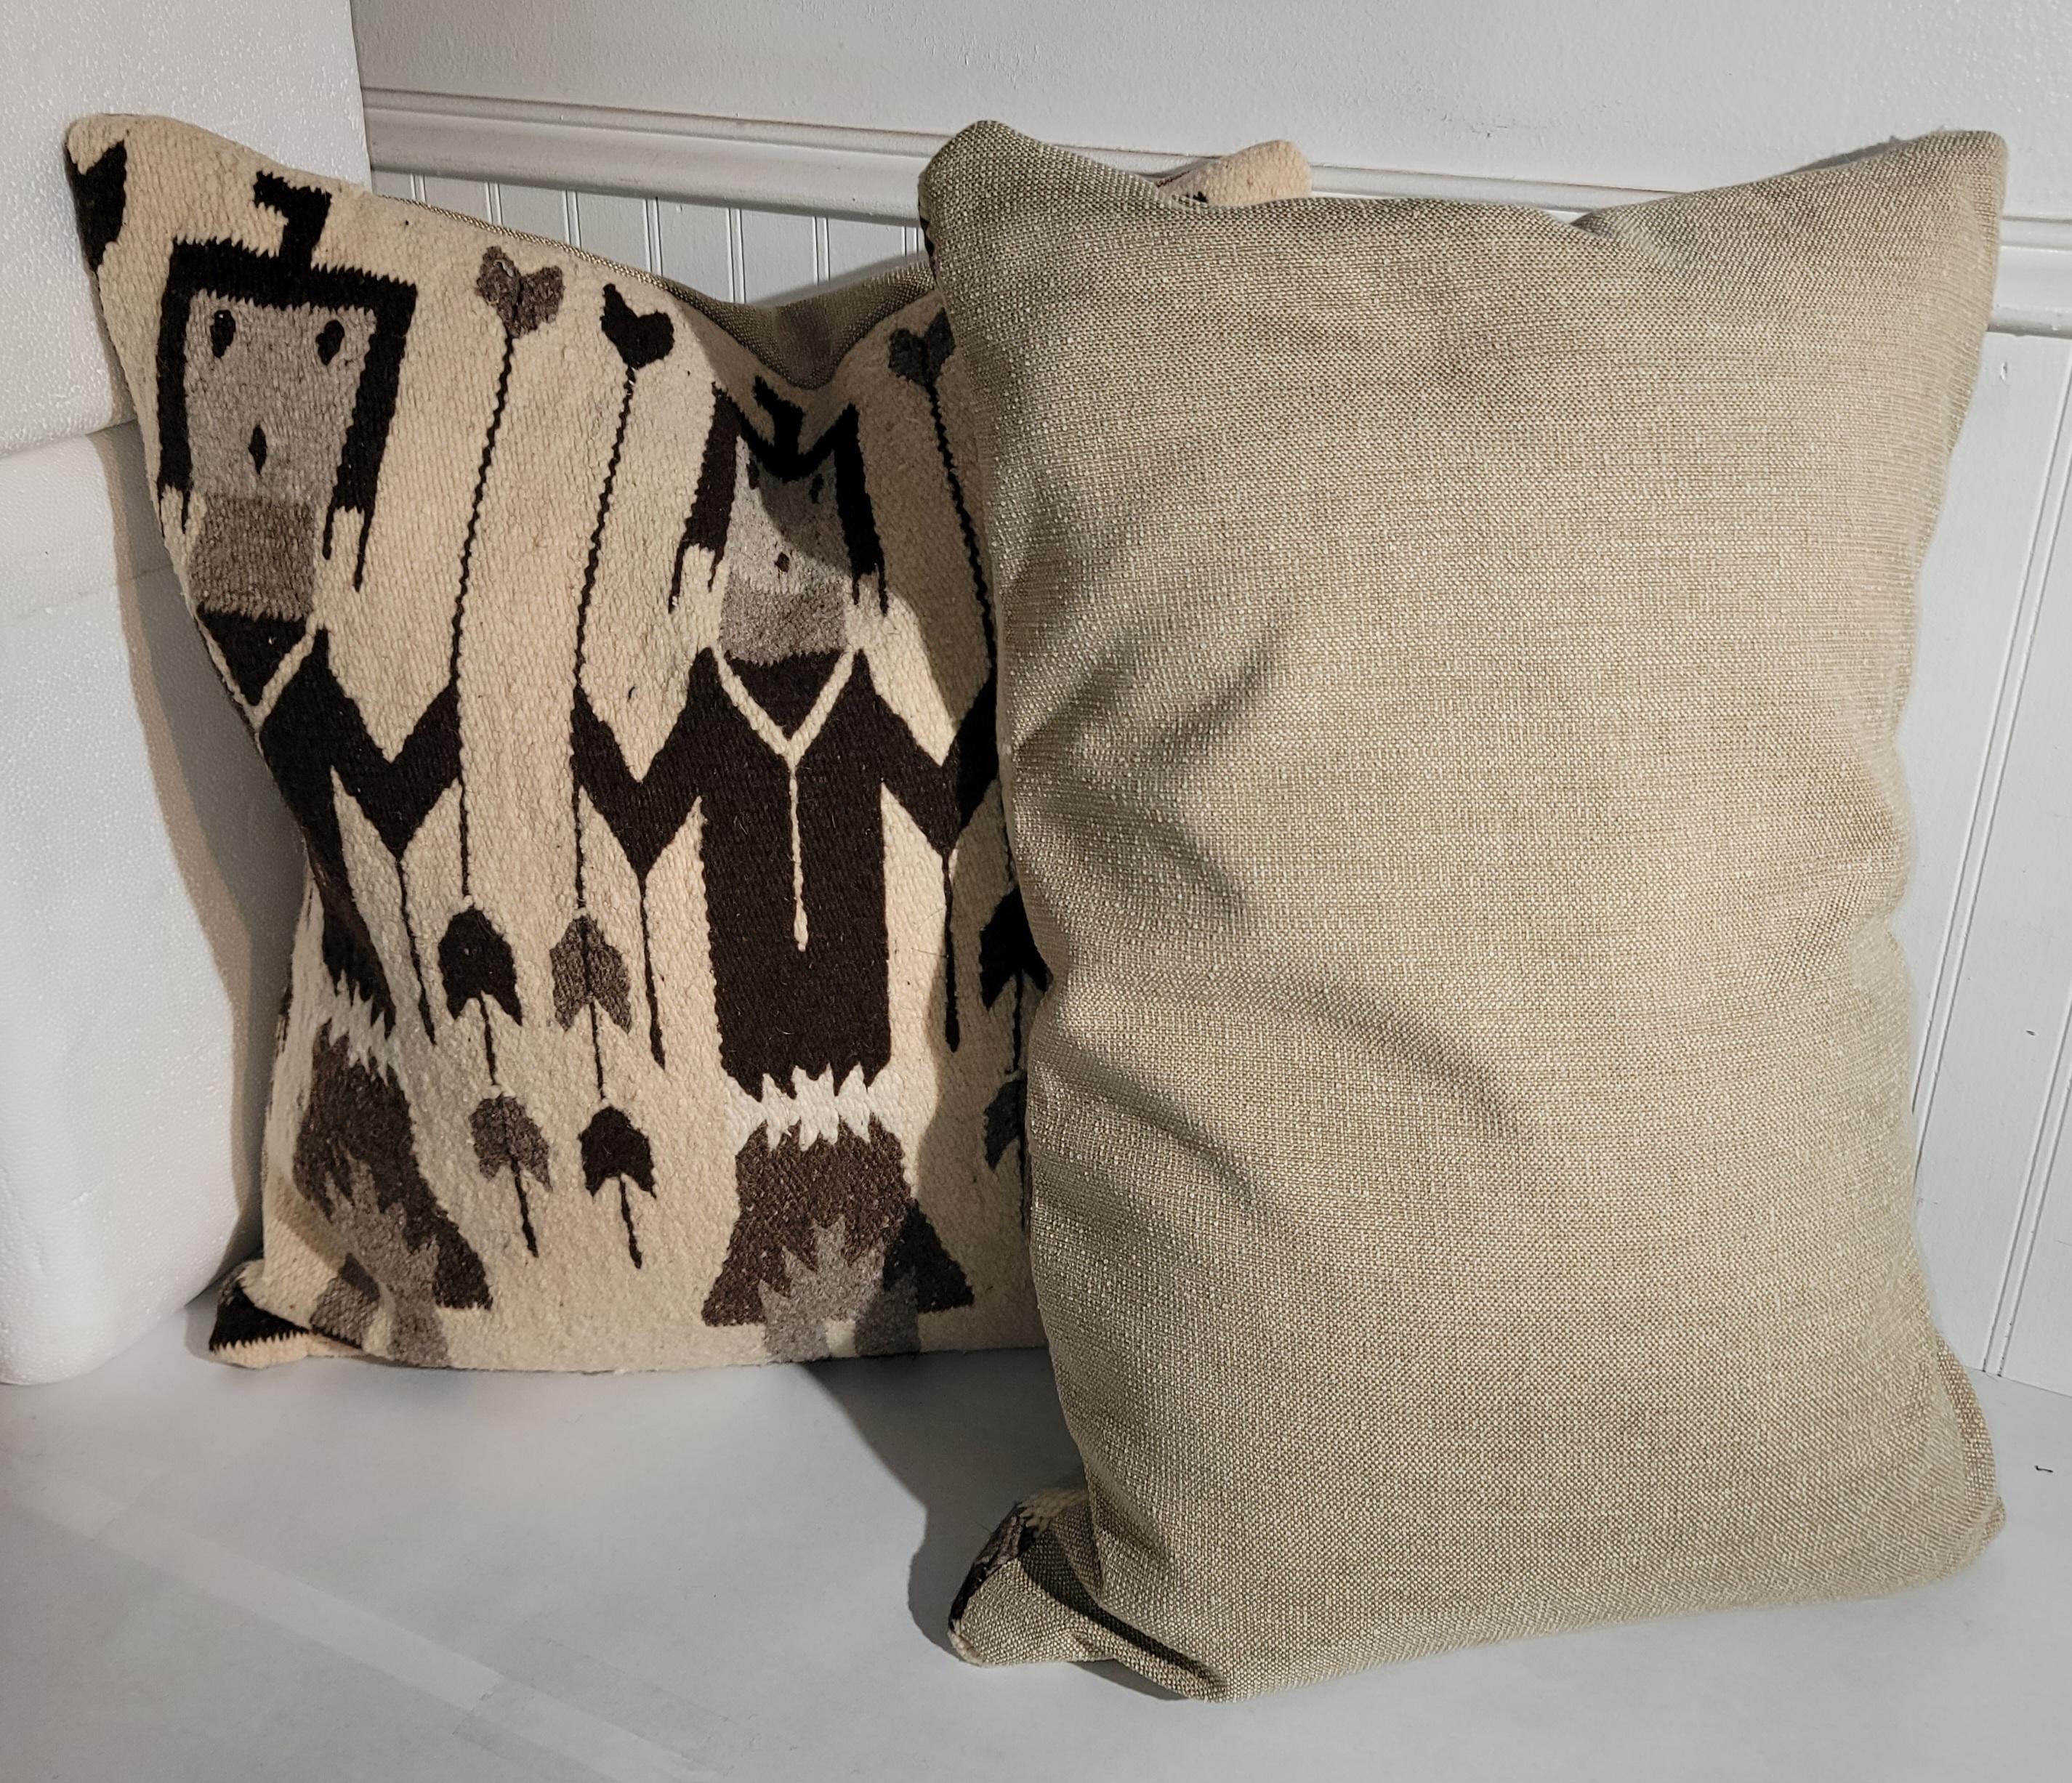 These Yei Indian weaving pillows are in fine condition and have linen backings.The inserts are down & feather fill.Sold as a matched pair.

Larger pillow measures 23 x 12
smaller pillow measures 23 x 16.